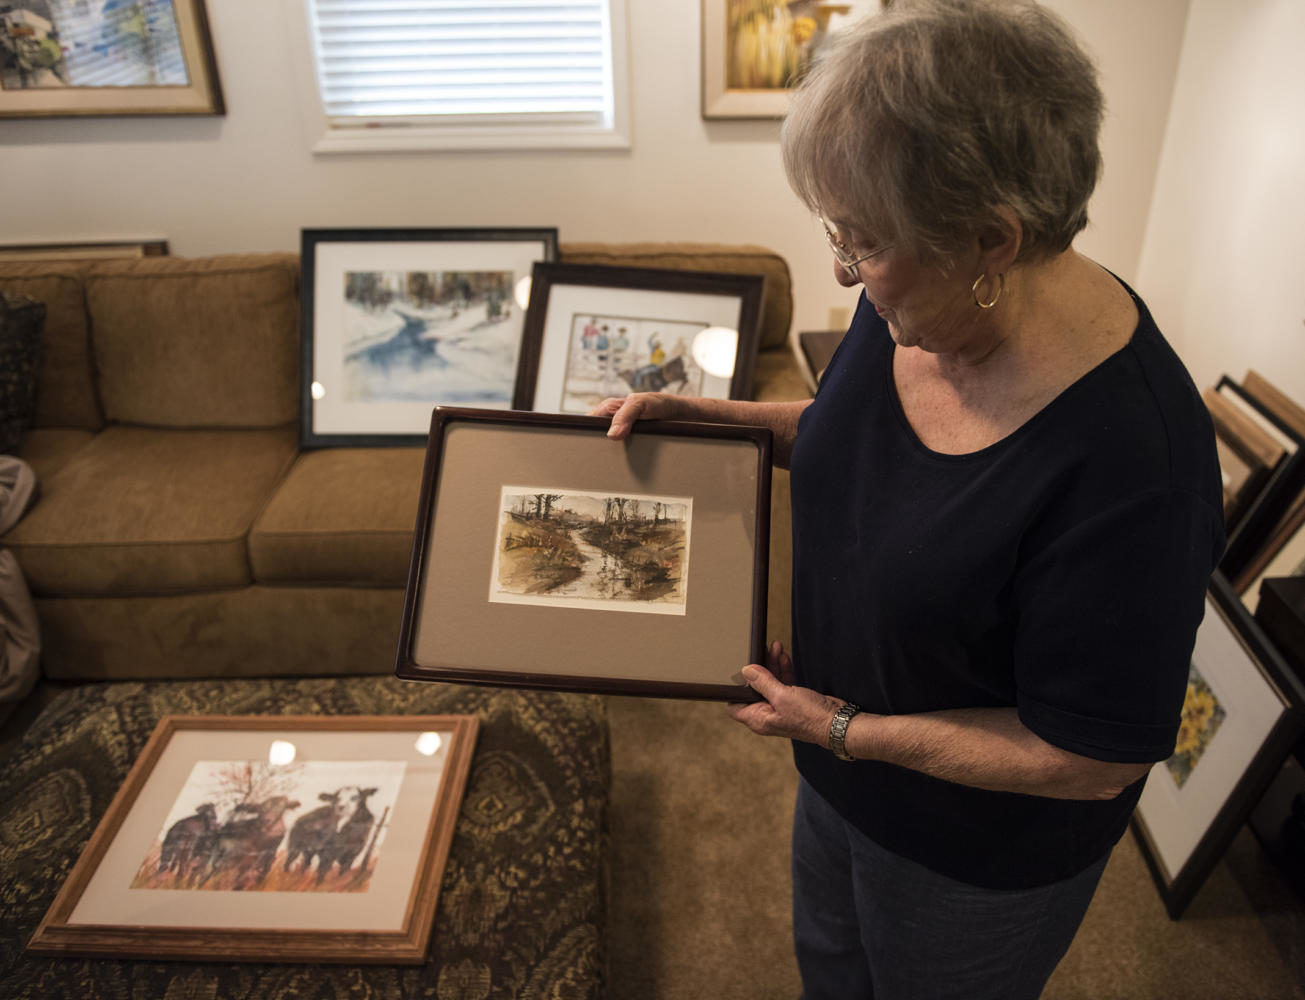 Carolyn Hollabaugh shows her painting called November Morning she did from a photo Tuesday Sept. 5, 2017, at her residence in Murphysboro. (Dylan Nelson | @DylanNelson99)